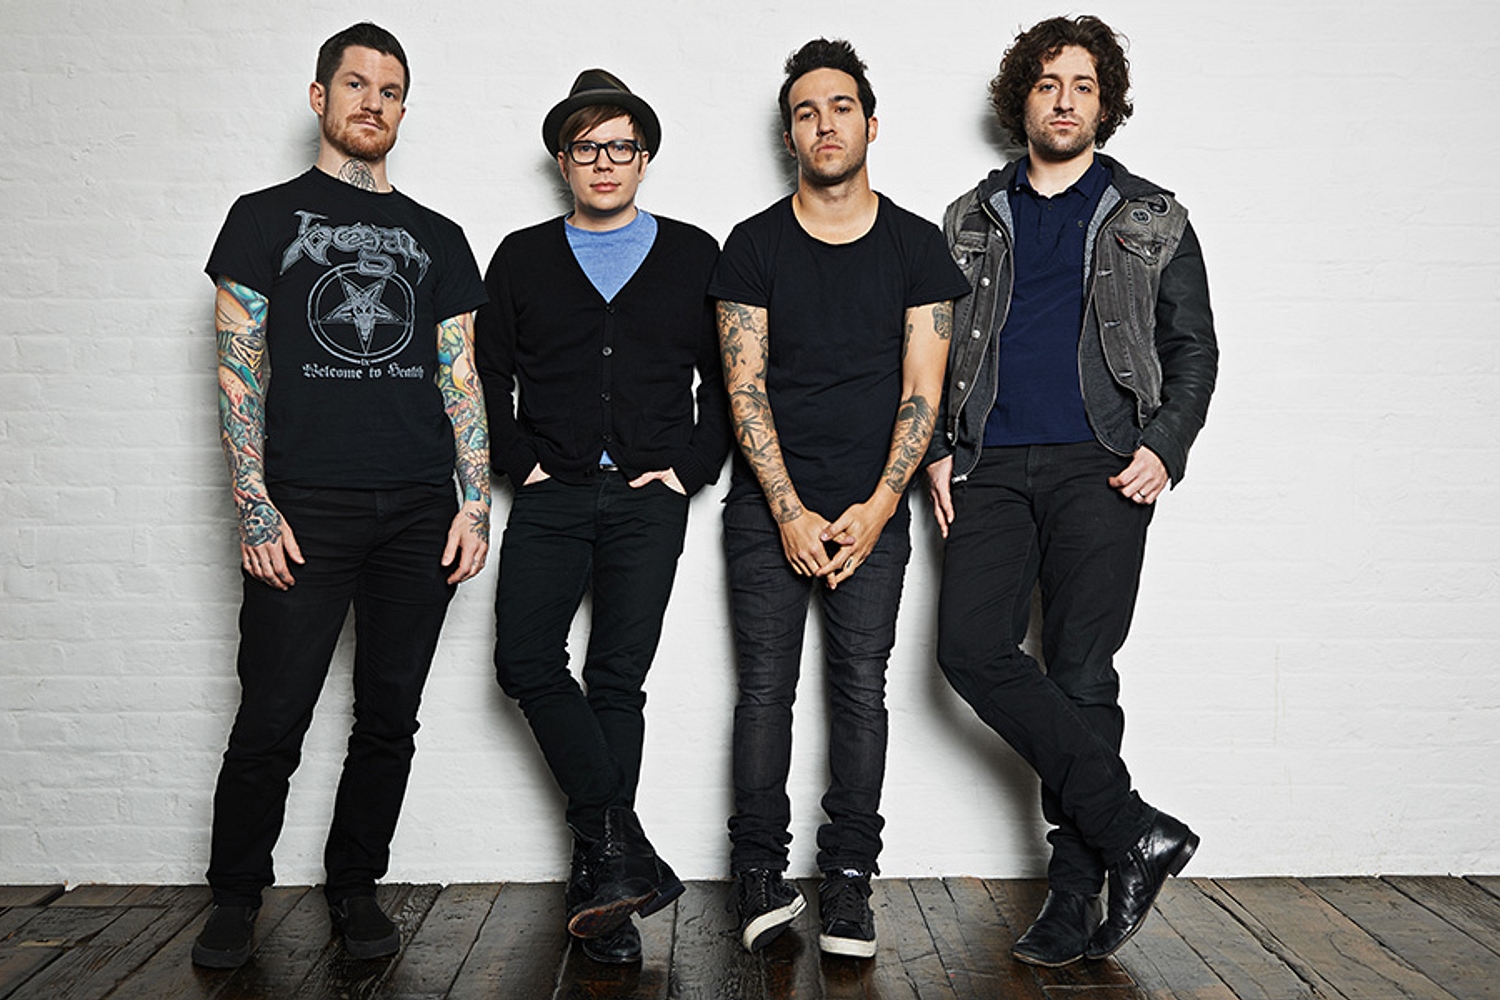 Listen to Fall Out Boy's new track 'Immortals' • News • DIY Magazine